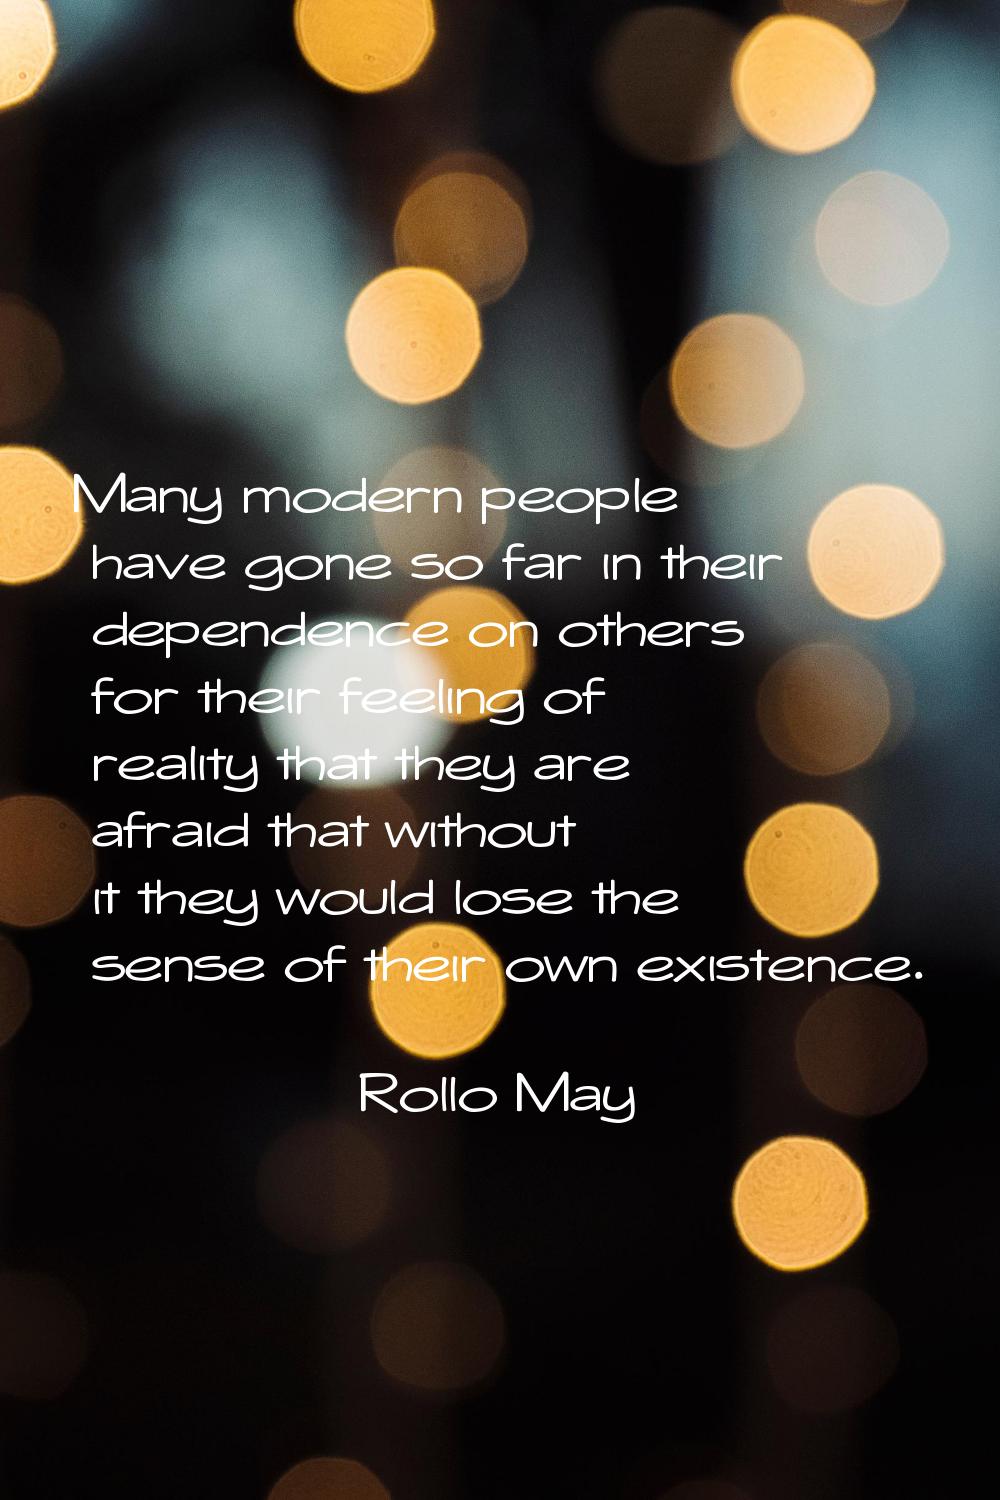 Many modern people have gone so far in their dependence on others for their feeling of reality that